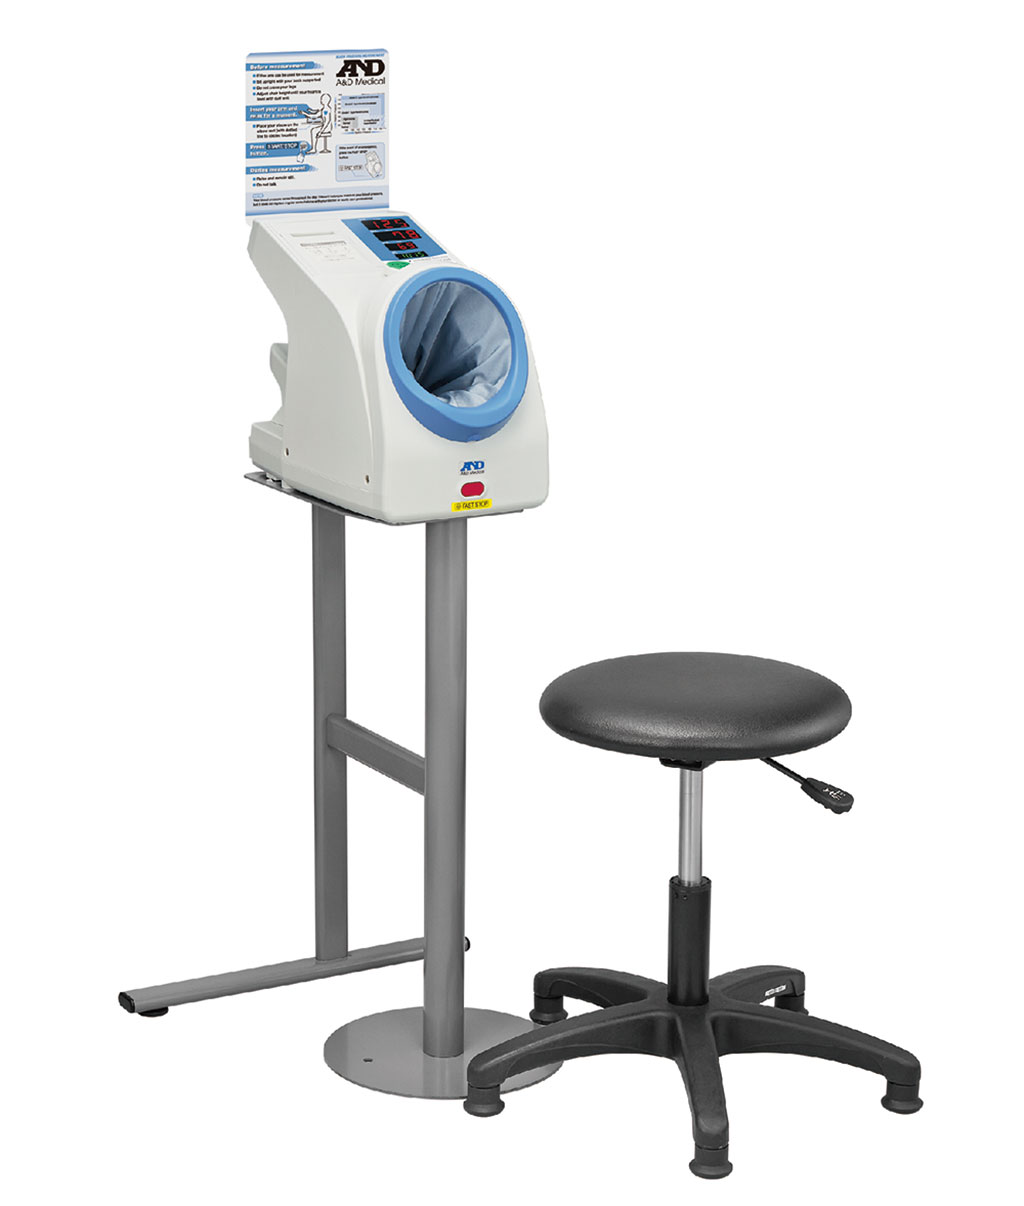 The TM-2657P automatic oscillometric BP device for waiting rooms (Photo courtesy of A&D)